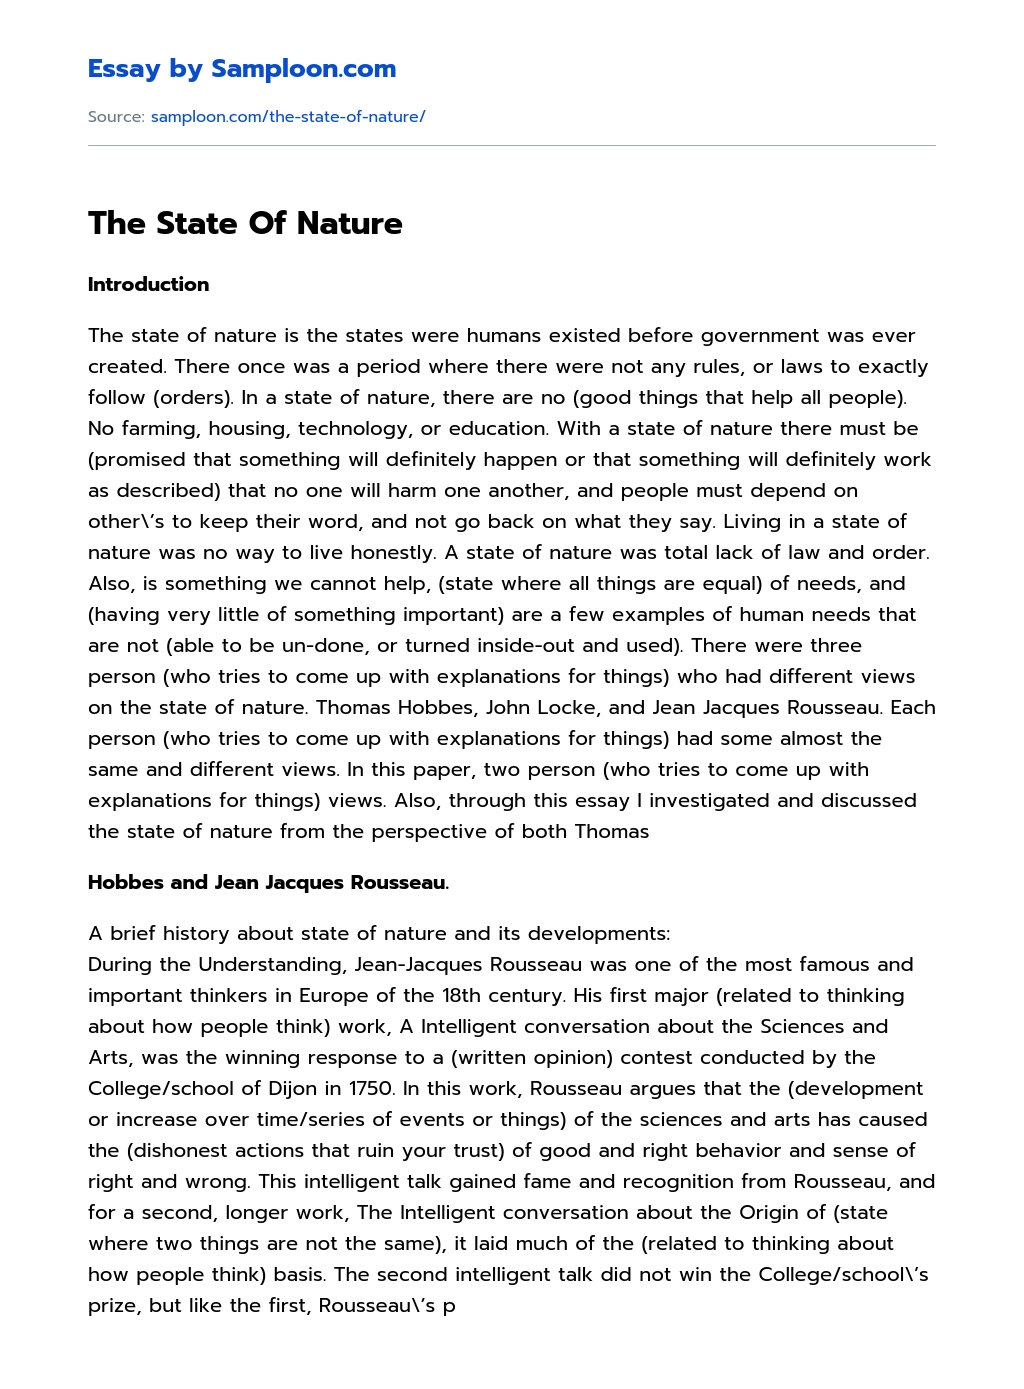 The State Of Nature essay